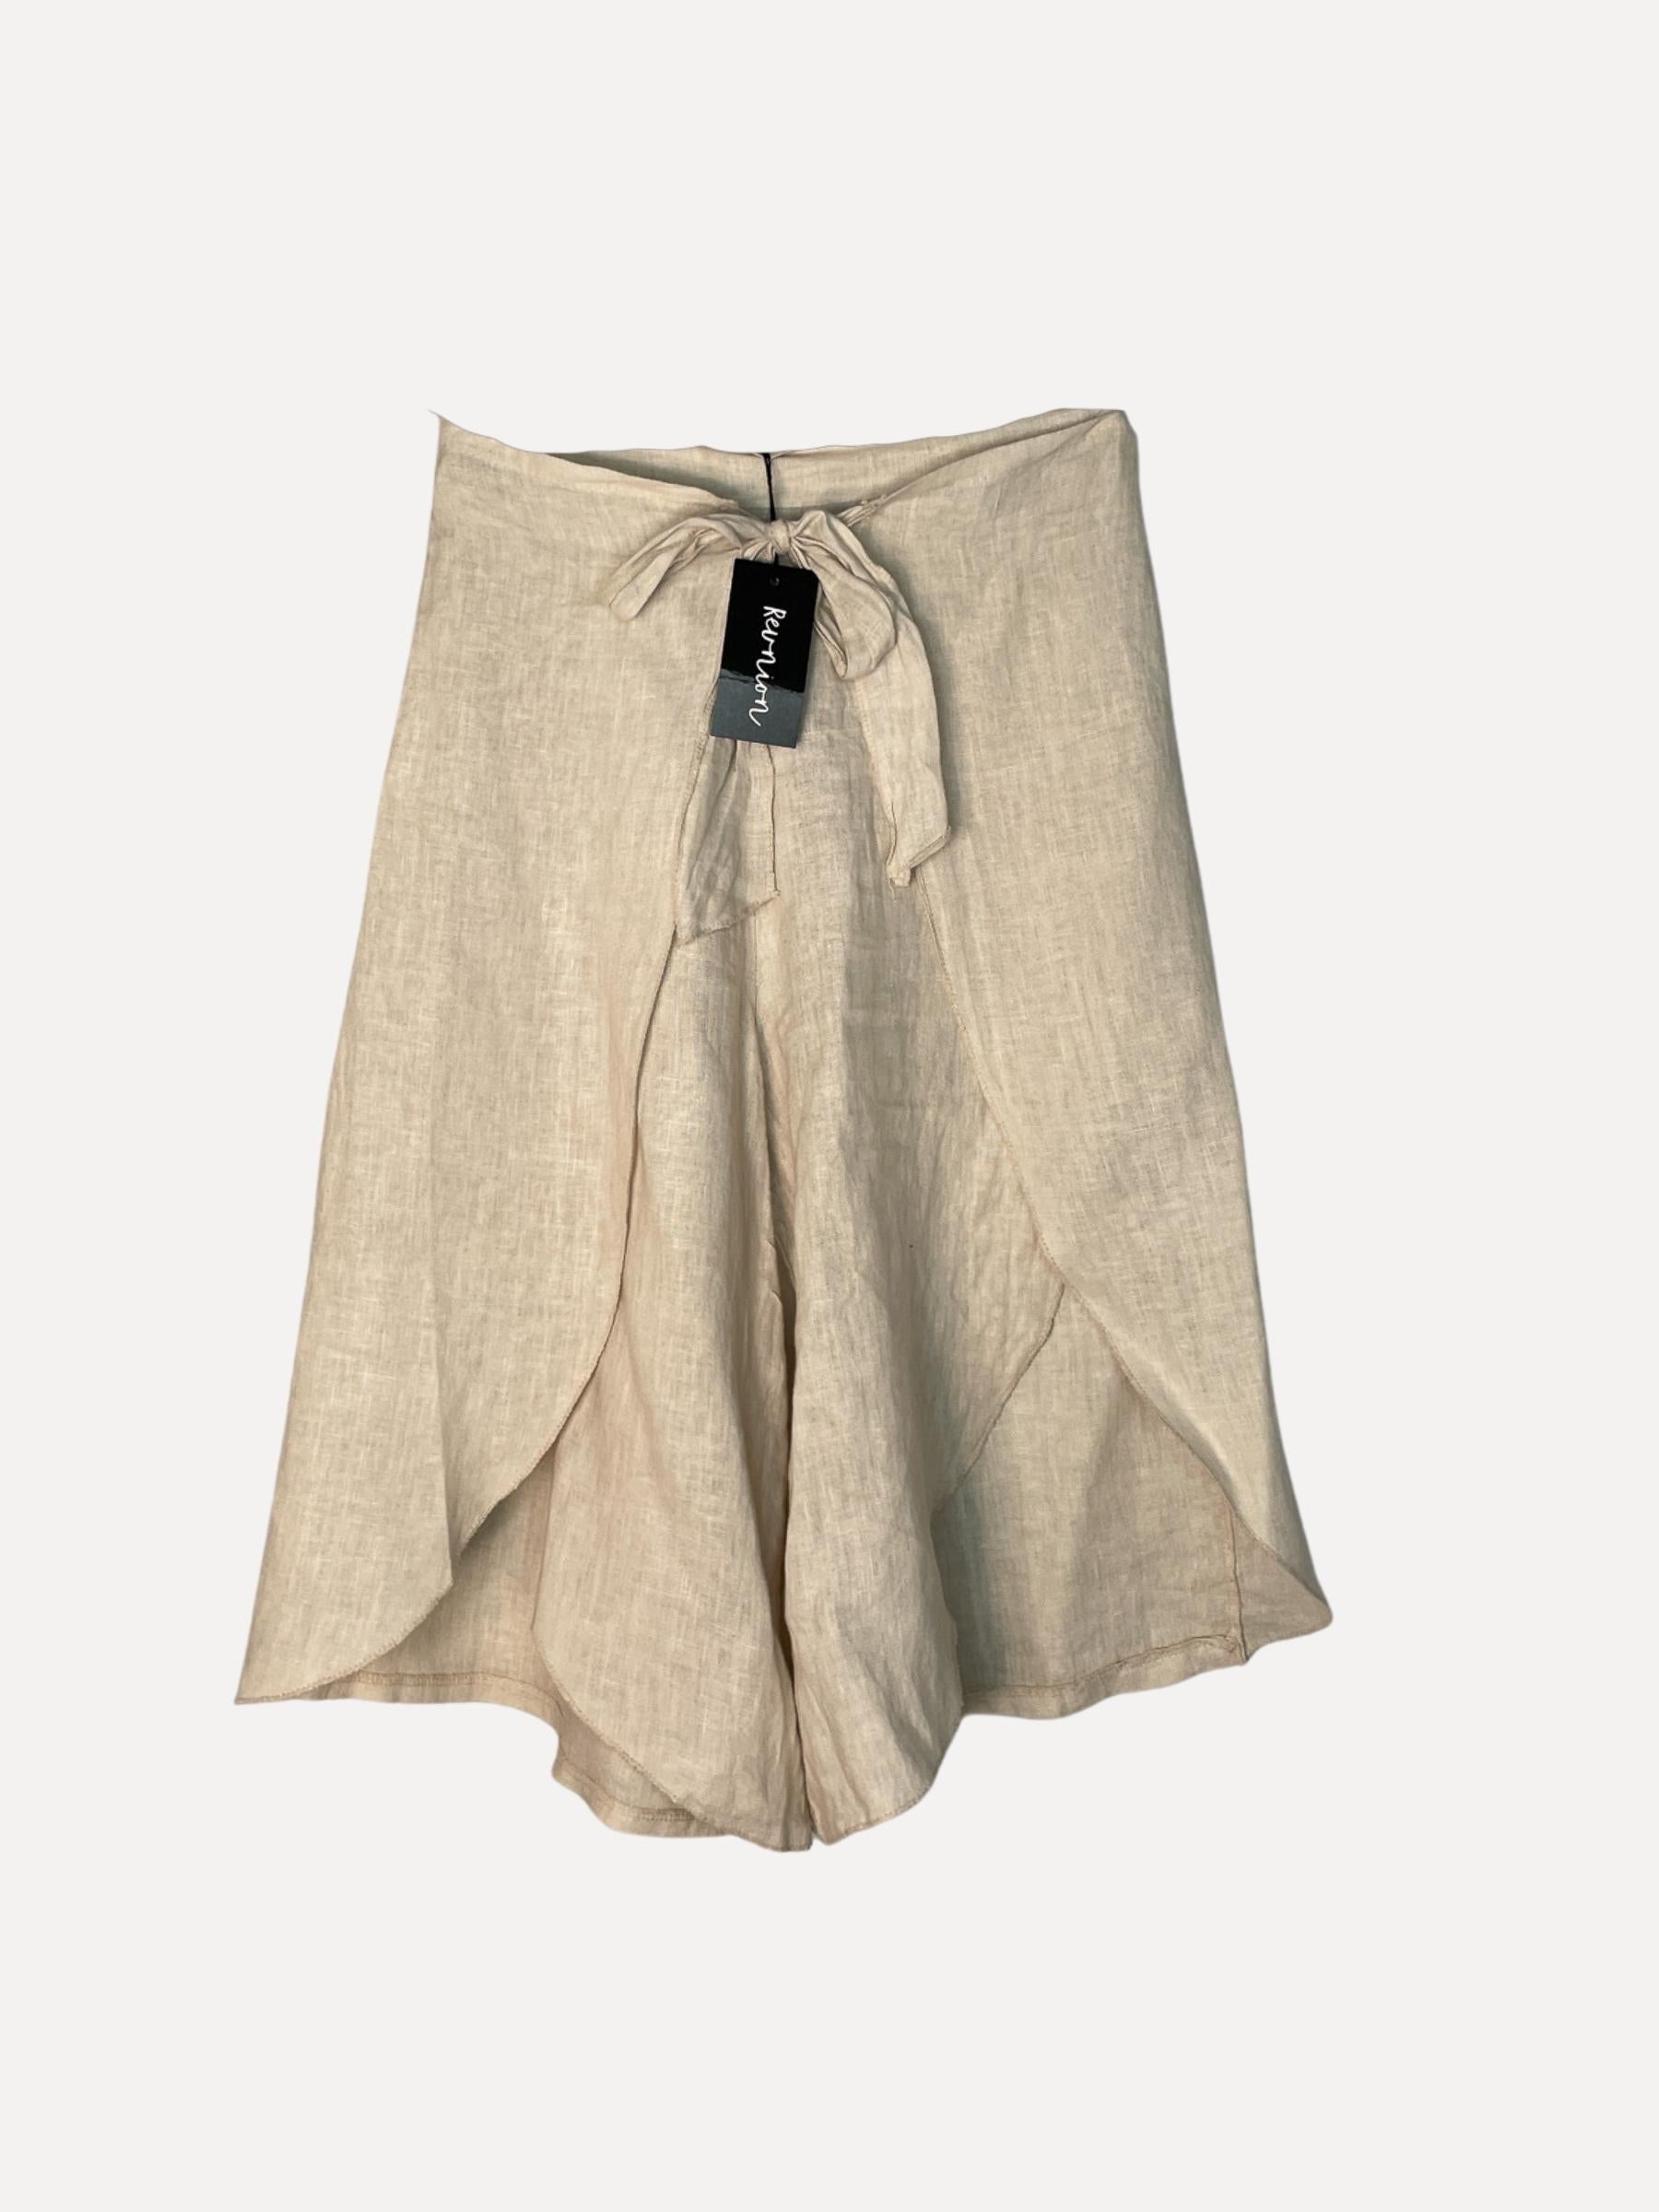 ORCHID Shorts, Beige